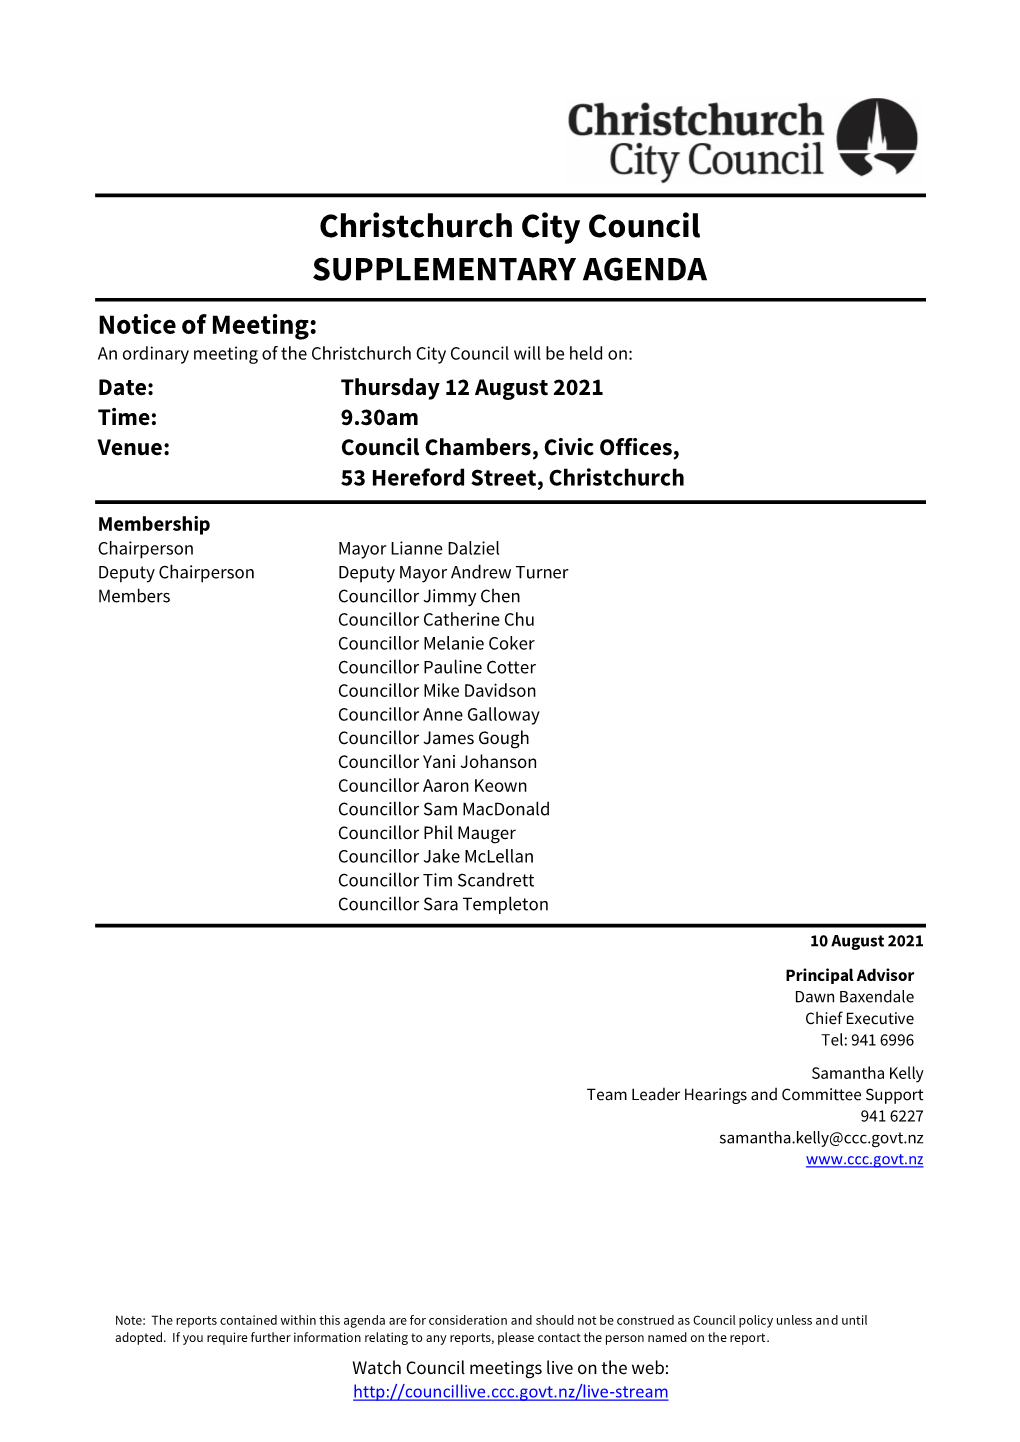 Supplementary Agenda of Council